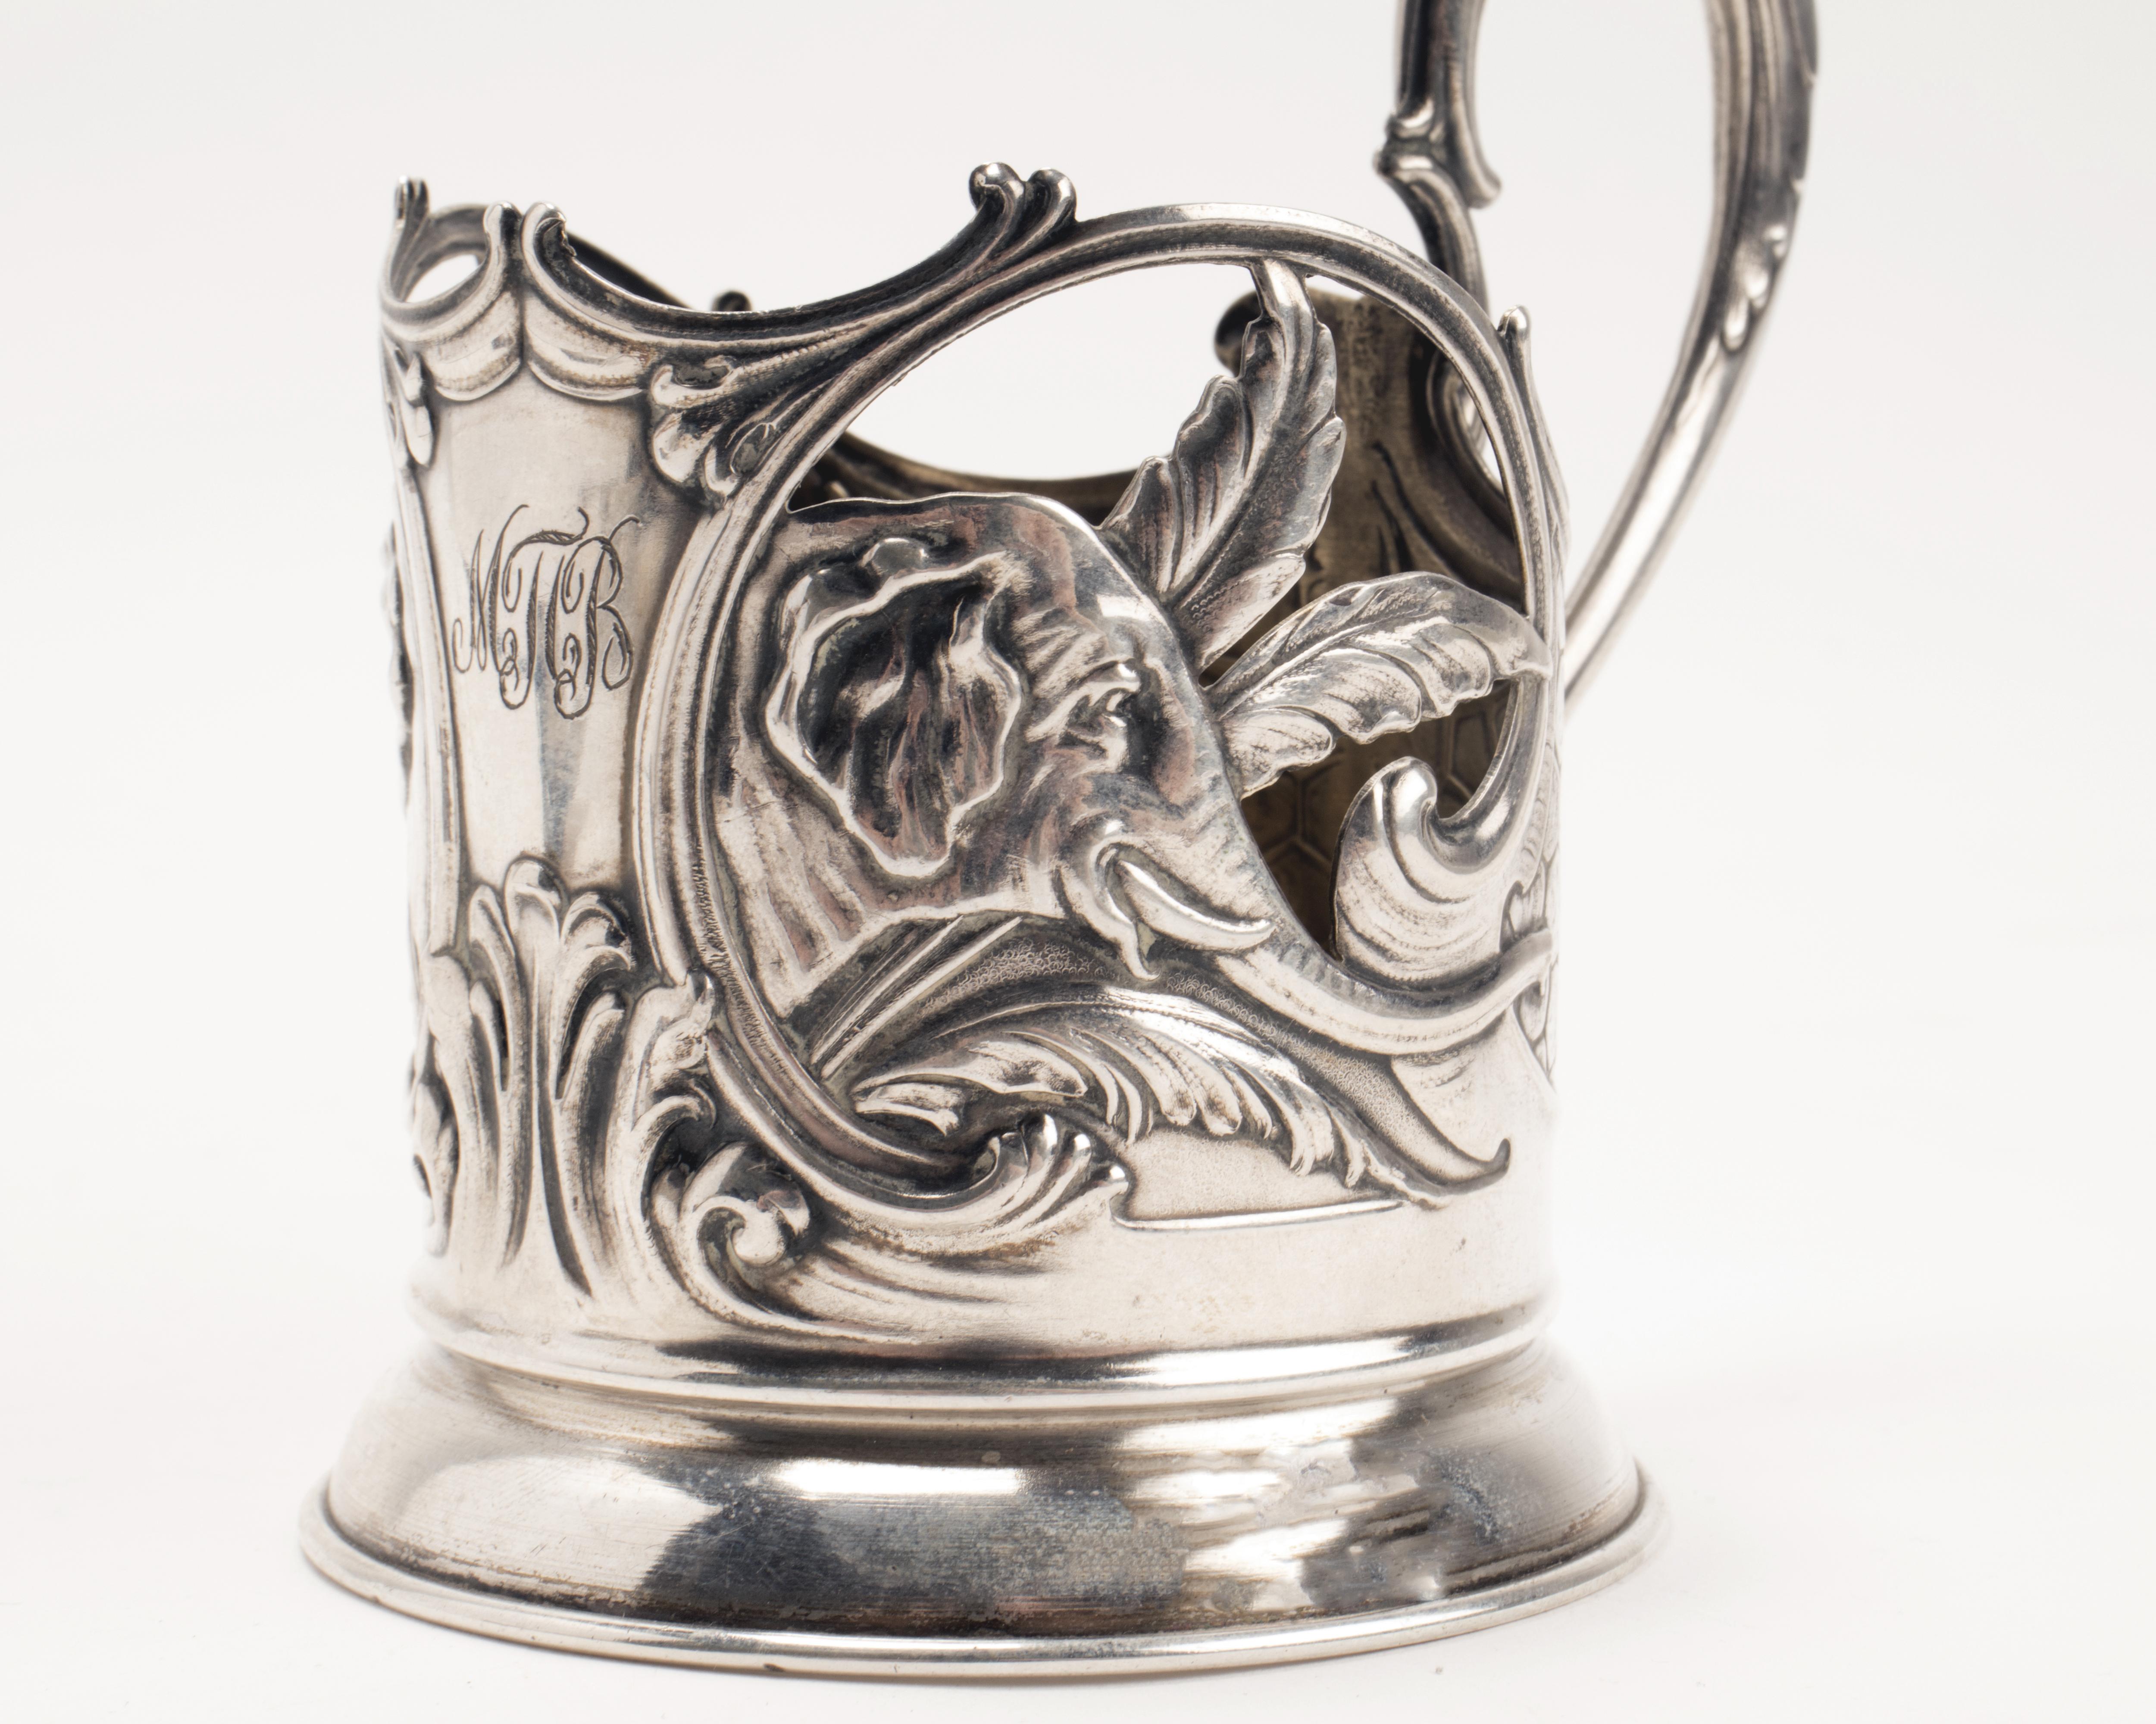 Russian Silver Cup Holder, Depicting an Elephant’s Head, Moscou 1900 For Sale